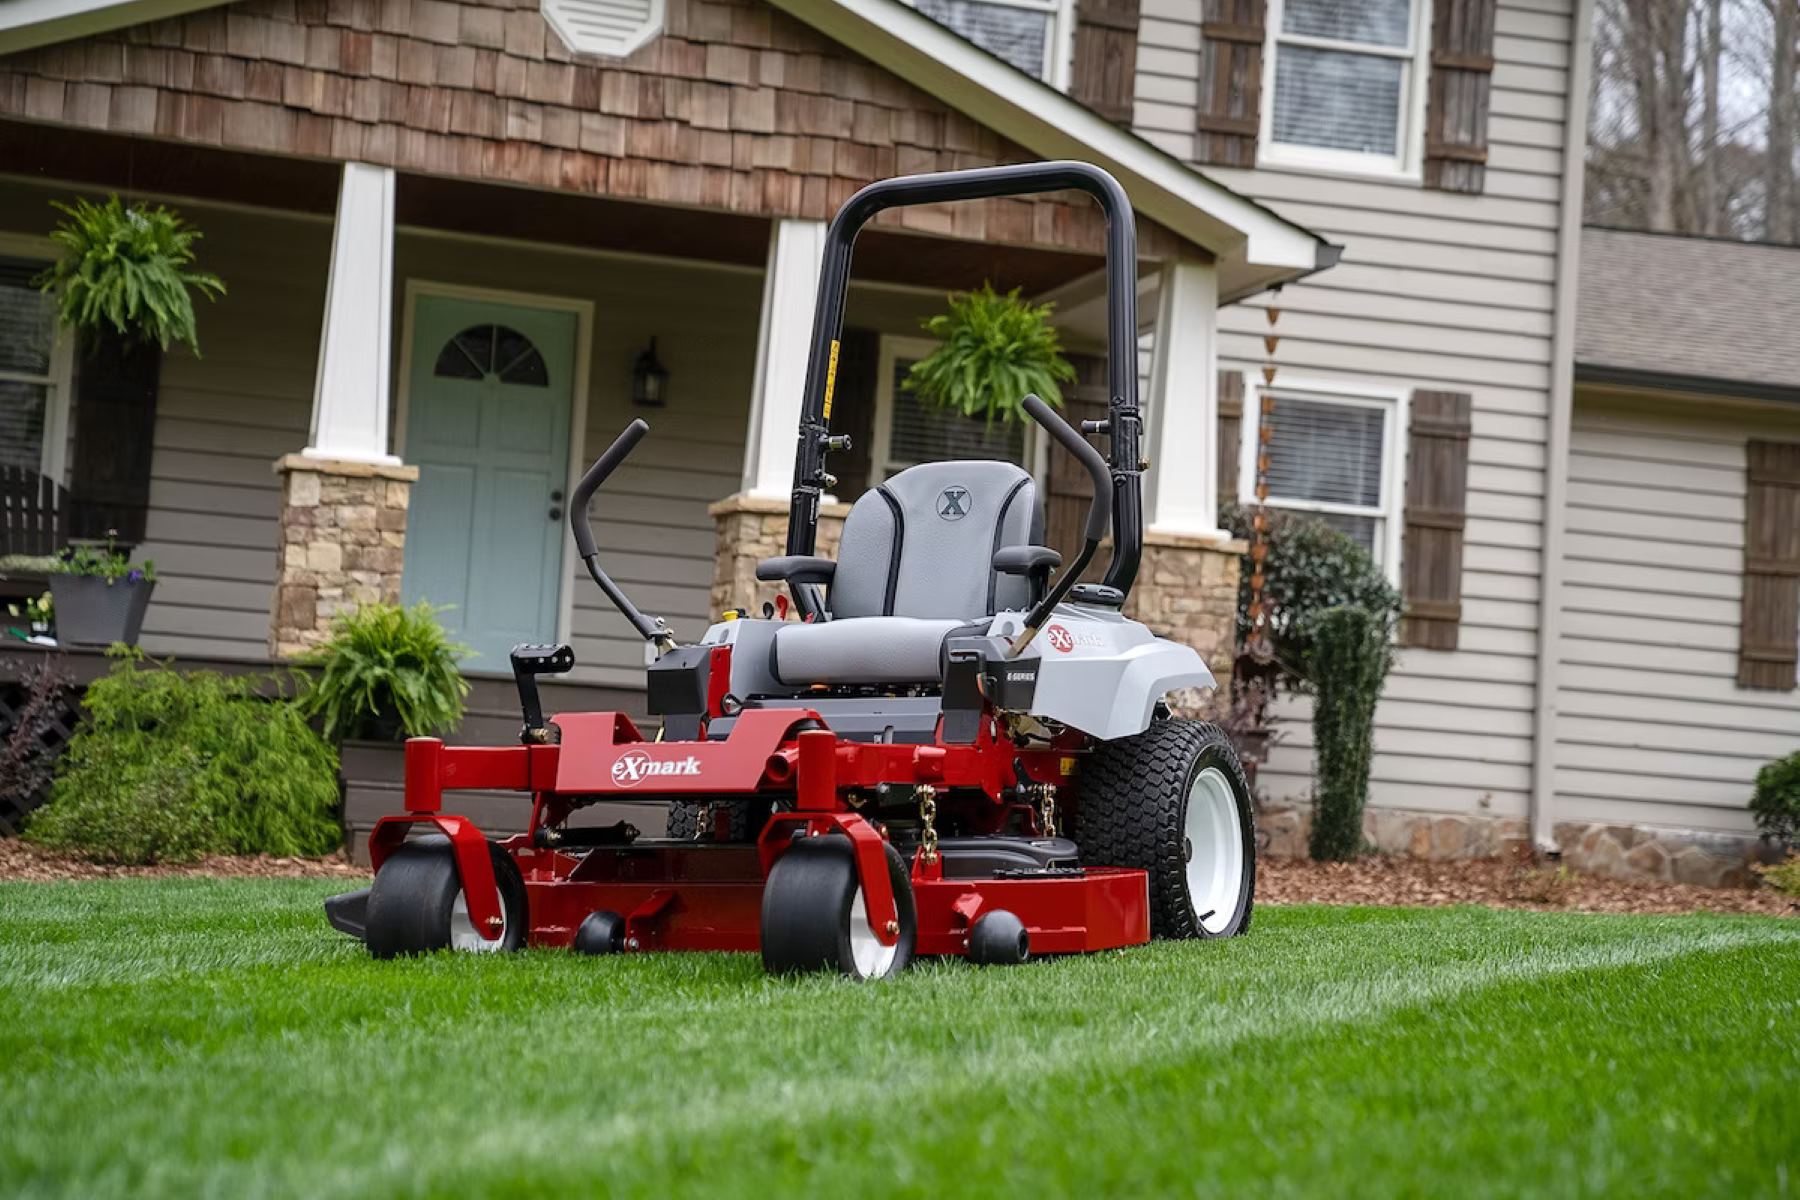 How To Store Riding Lawn Mower Outside